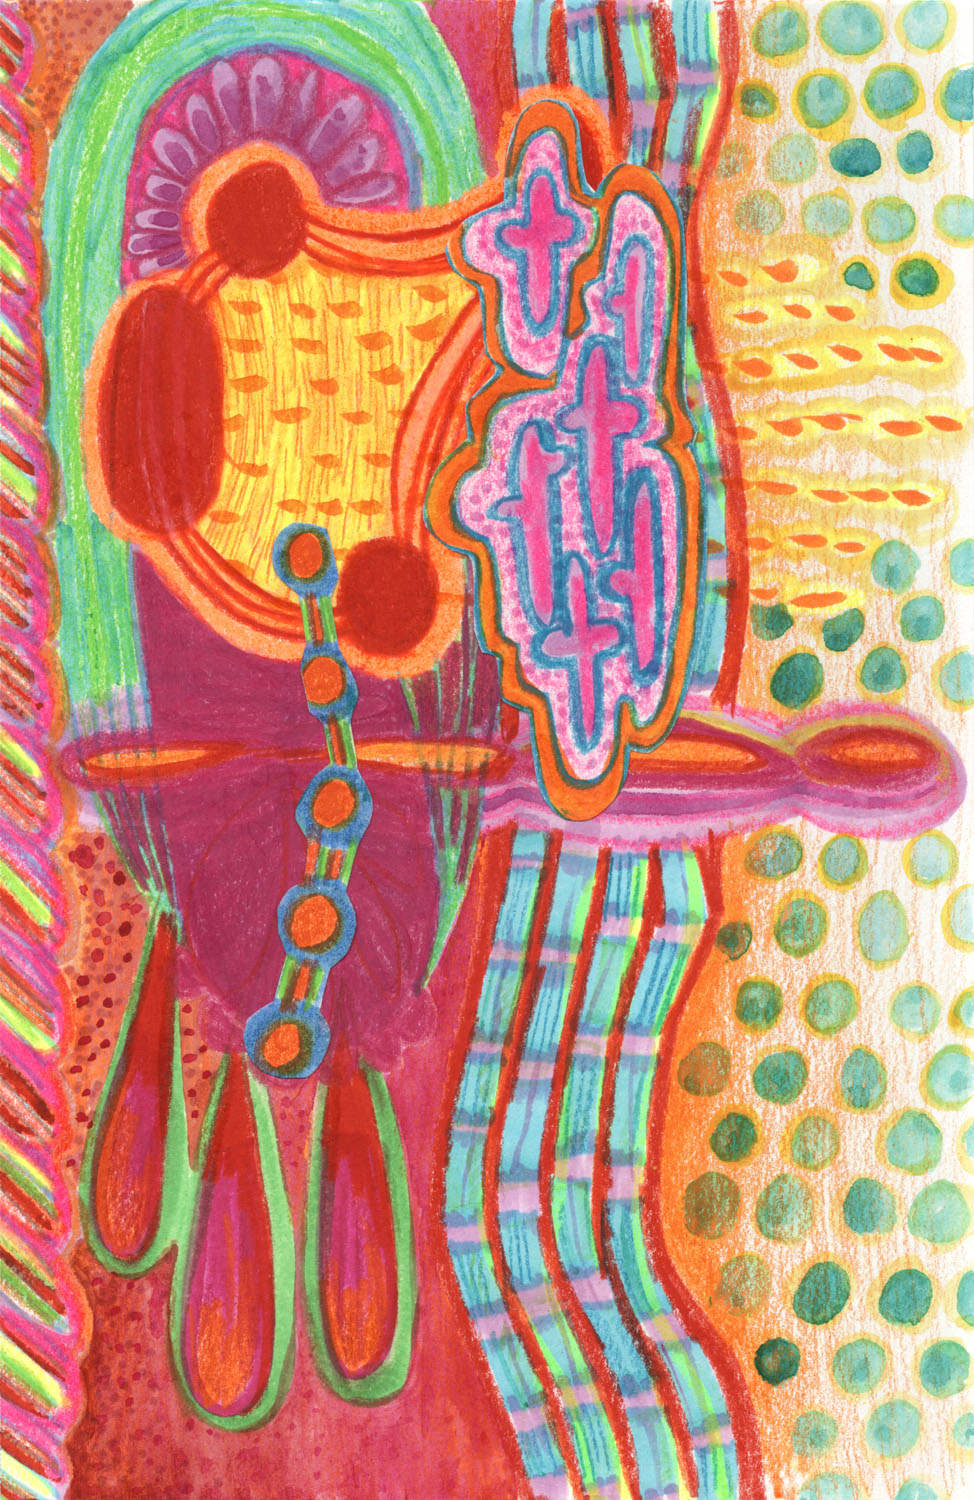 Bright, colorful abstract all over drawing in pinks, greens, and yellows.